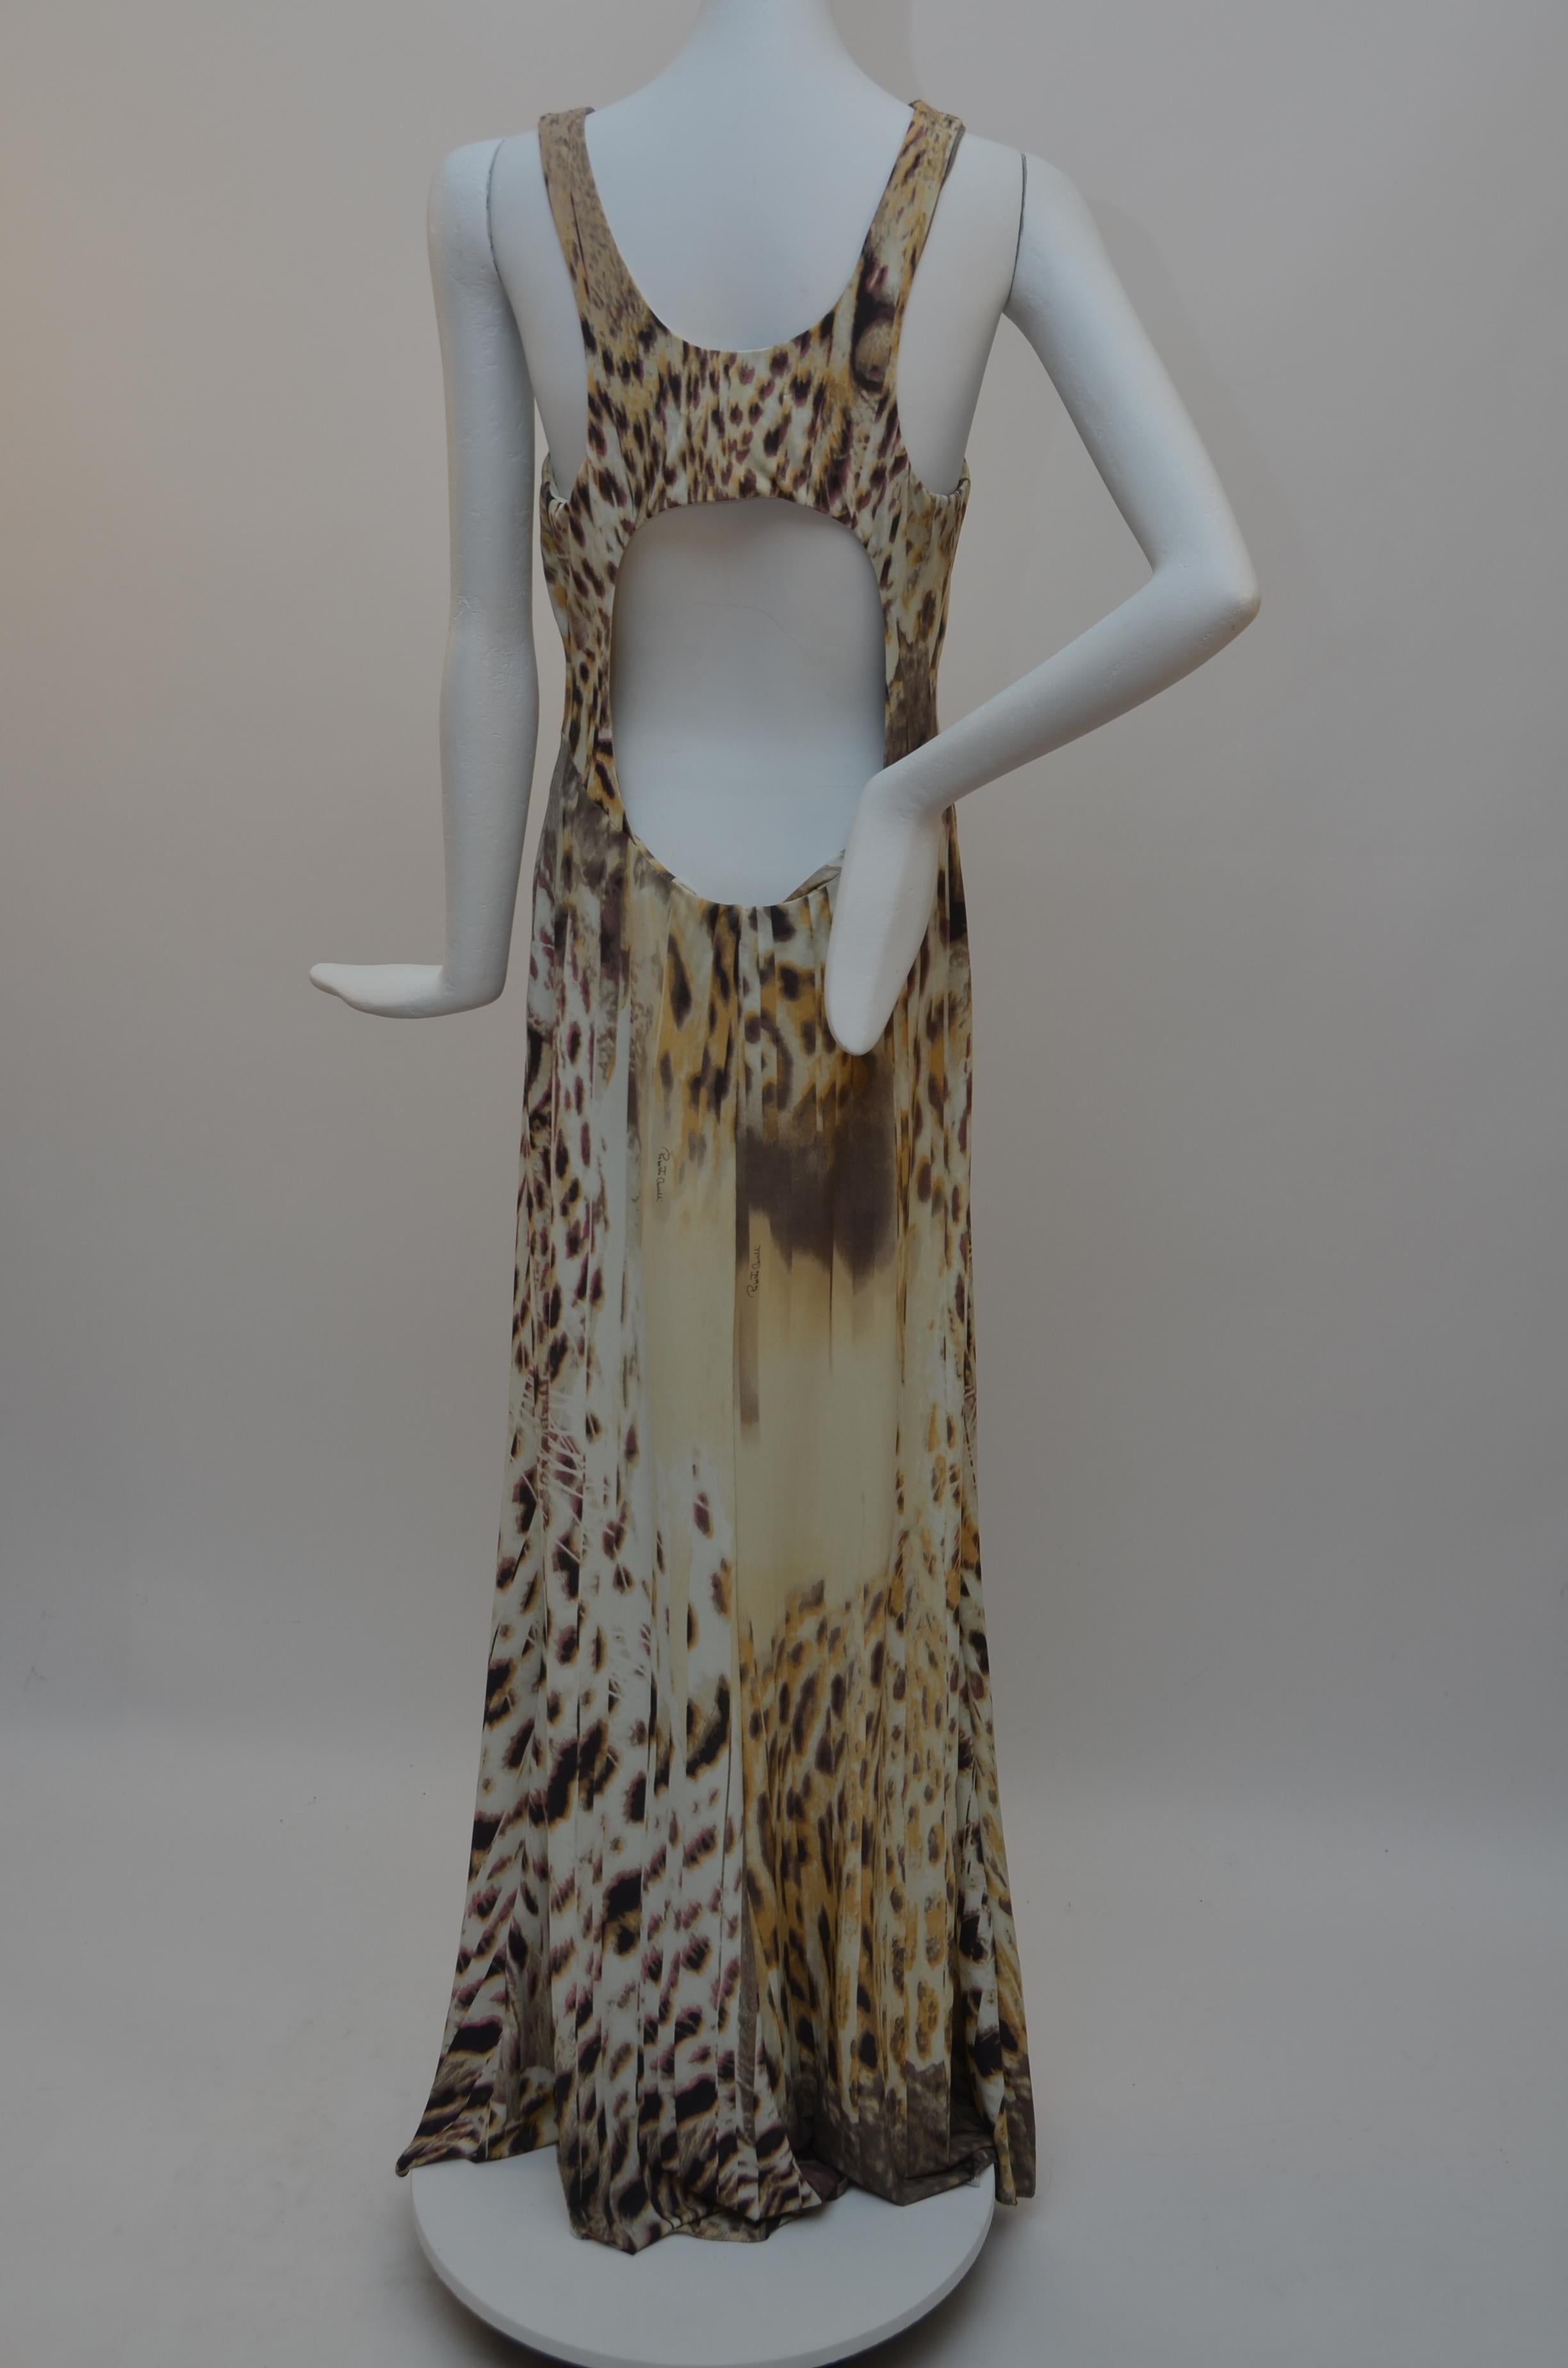 Roberto Cavalli Long  Dress
NEW with tags with few minor flaws and can be seen  on one of the picture.
Neutral colors 
Animal Print.Fabric is stretchy.
Photographed on mannequin size 2US.
Sleeveless with V-Neck

Size 42

FINAL SALE